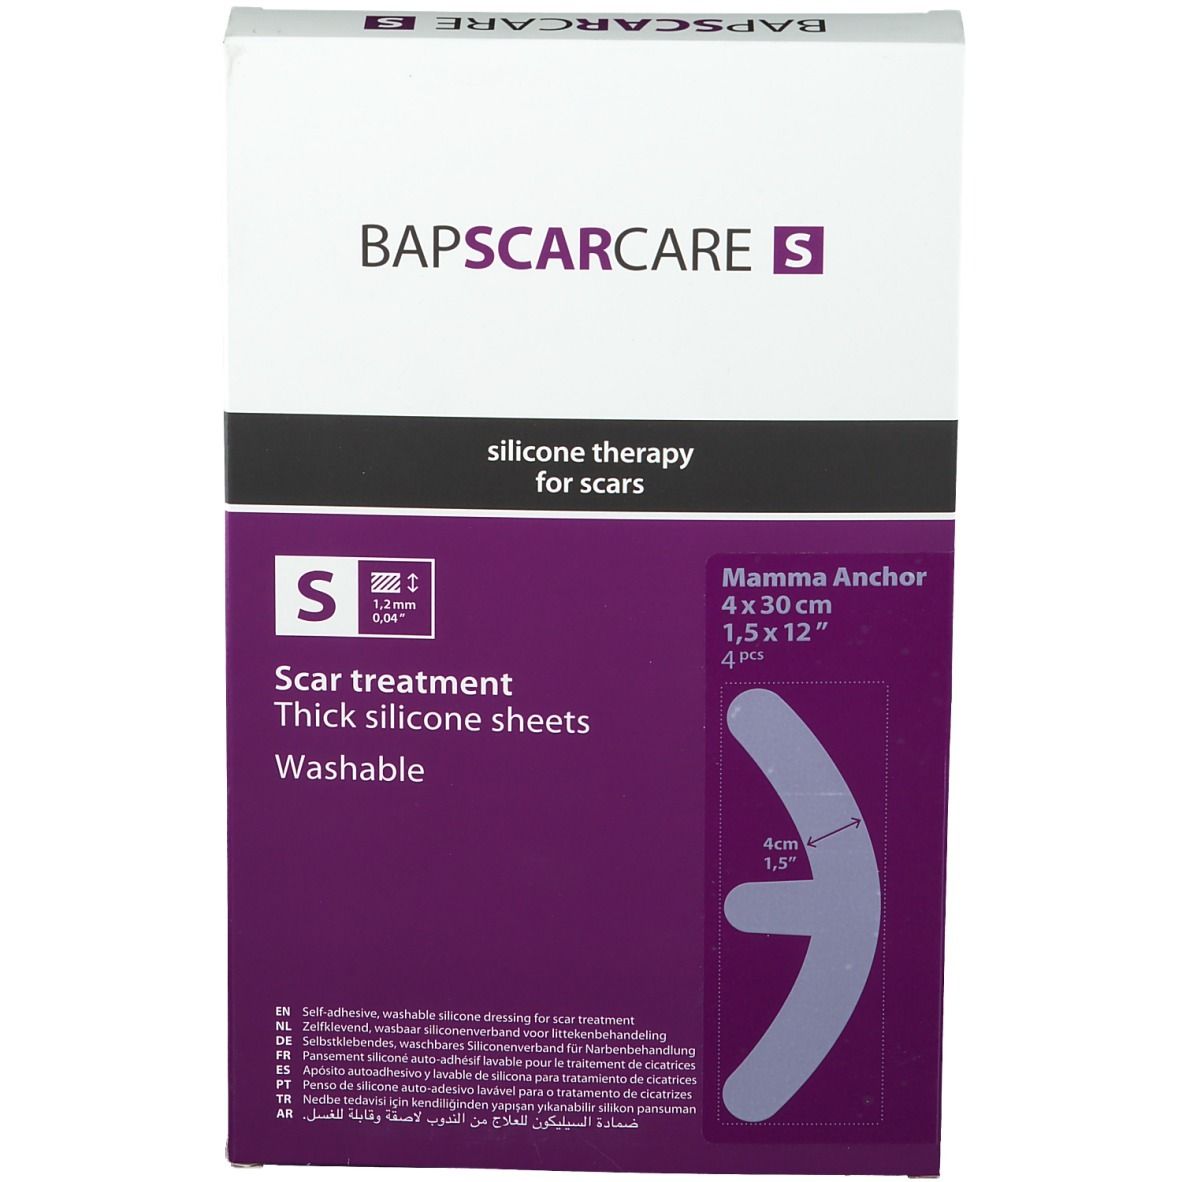 Image of BAP SCAR CARE S Silikonverband für Narbenbehandlung 4 x 30 cm